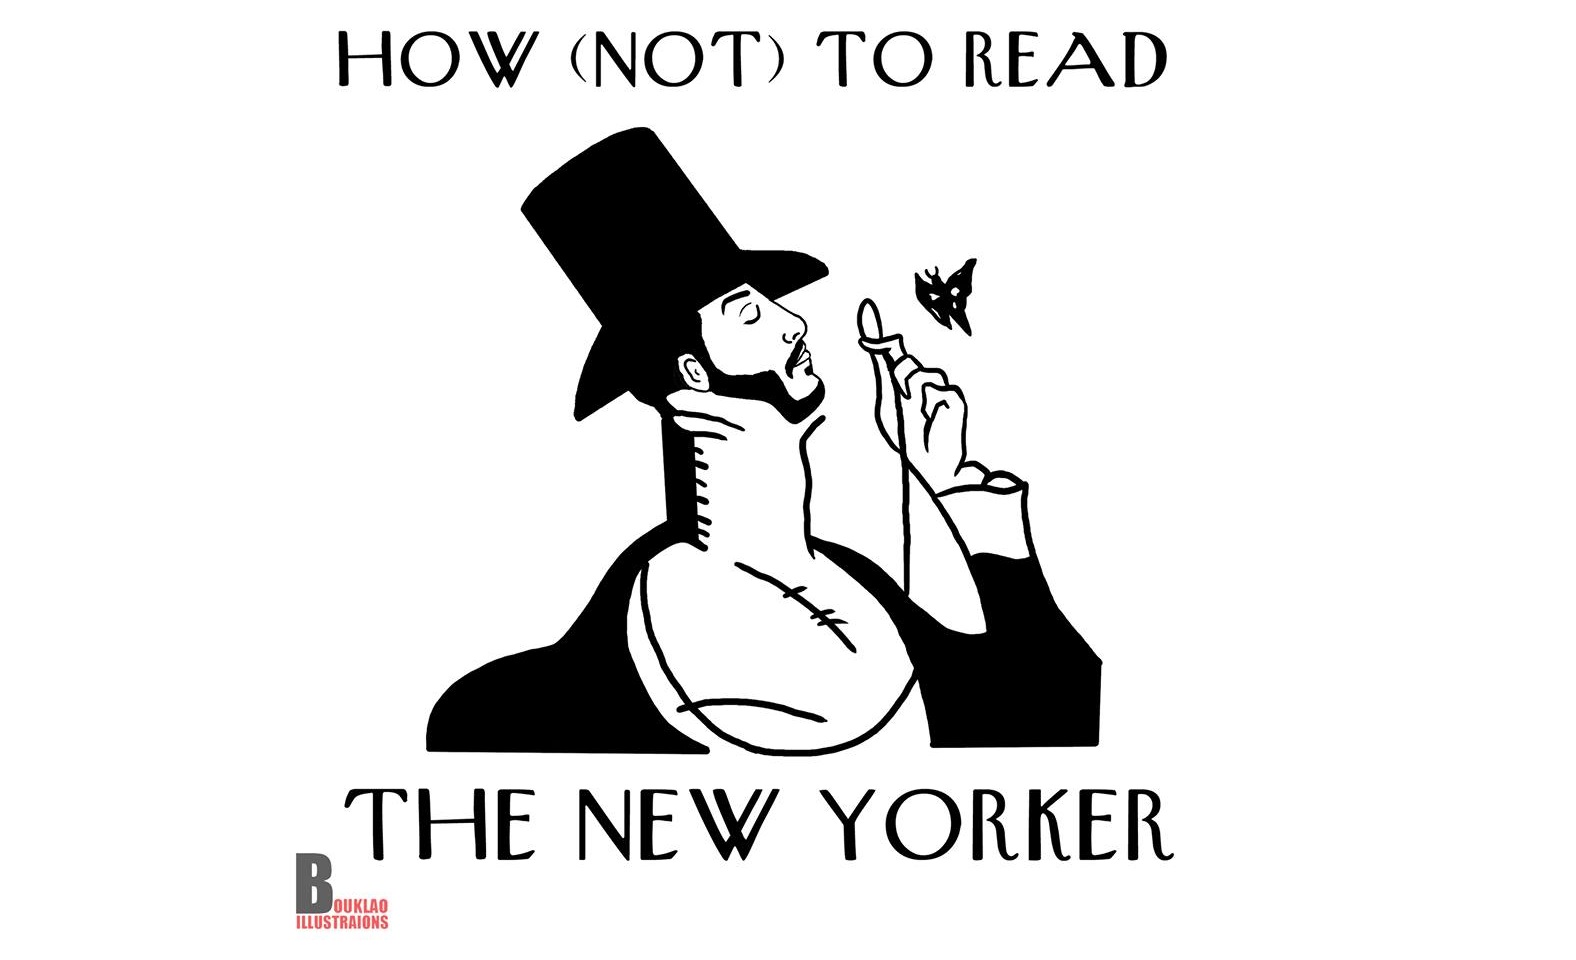 How Not to Read The New Yorker